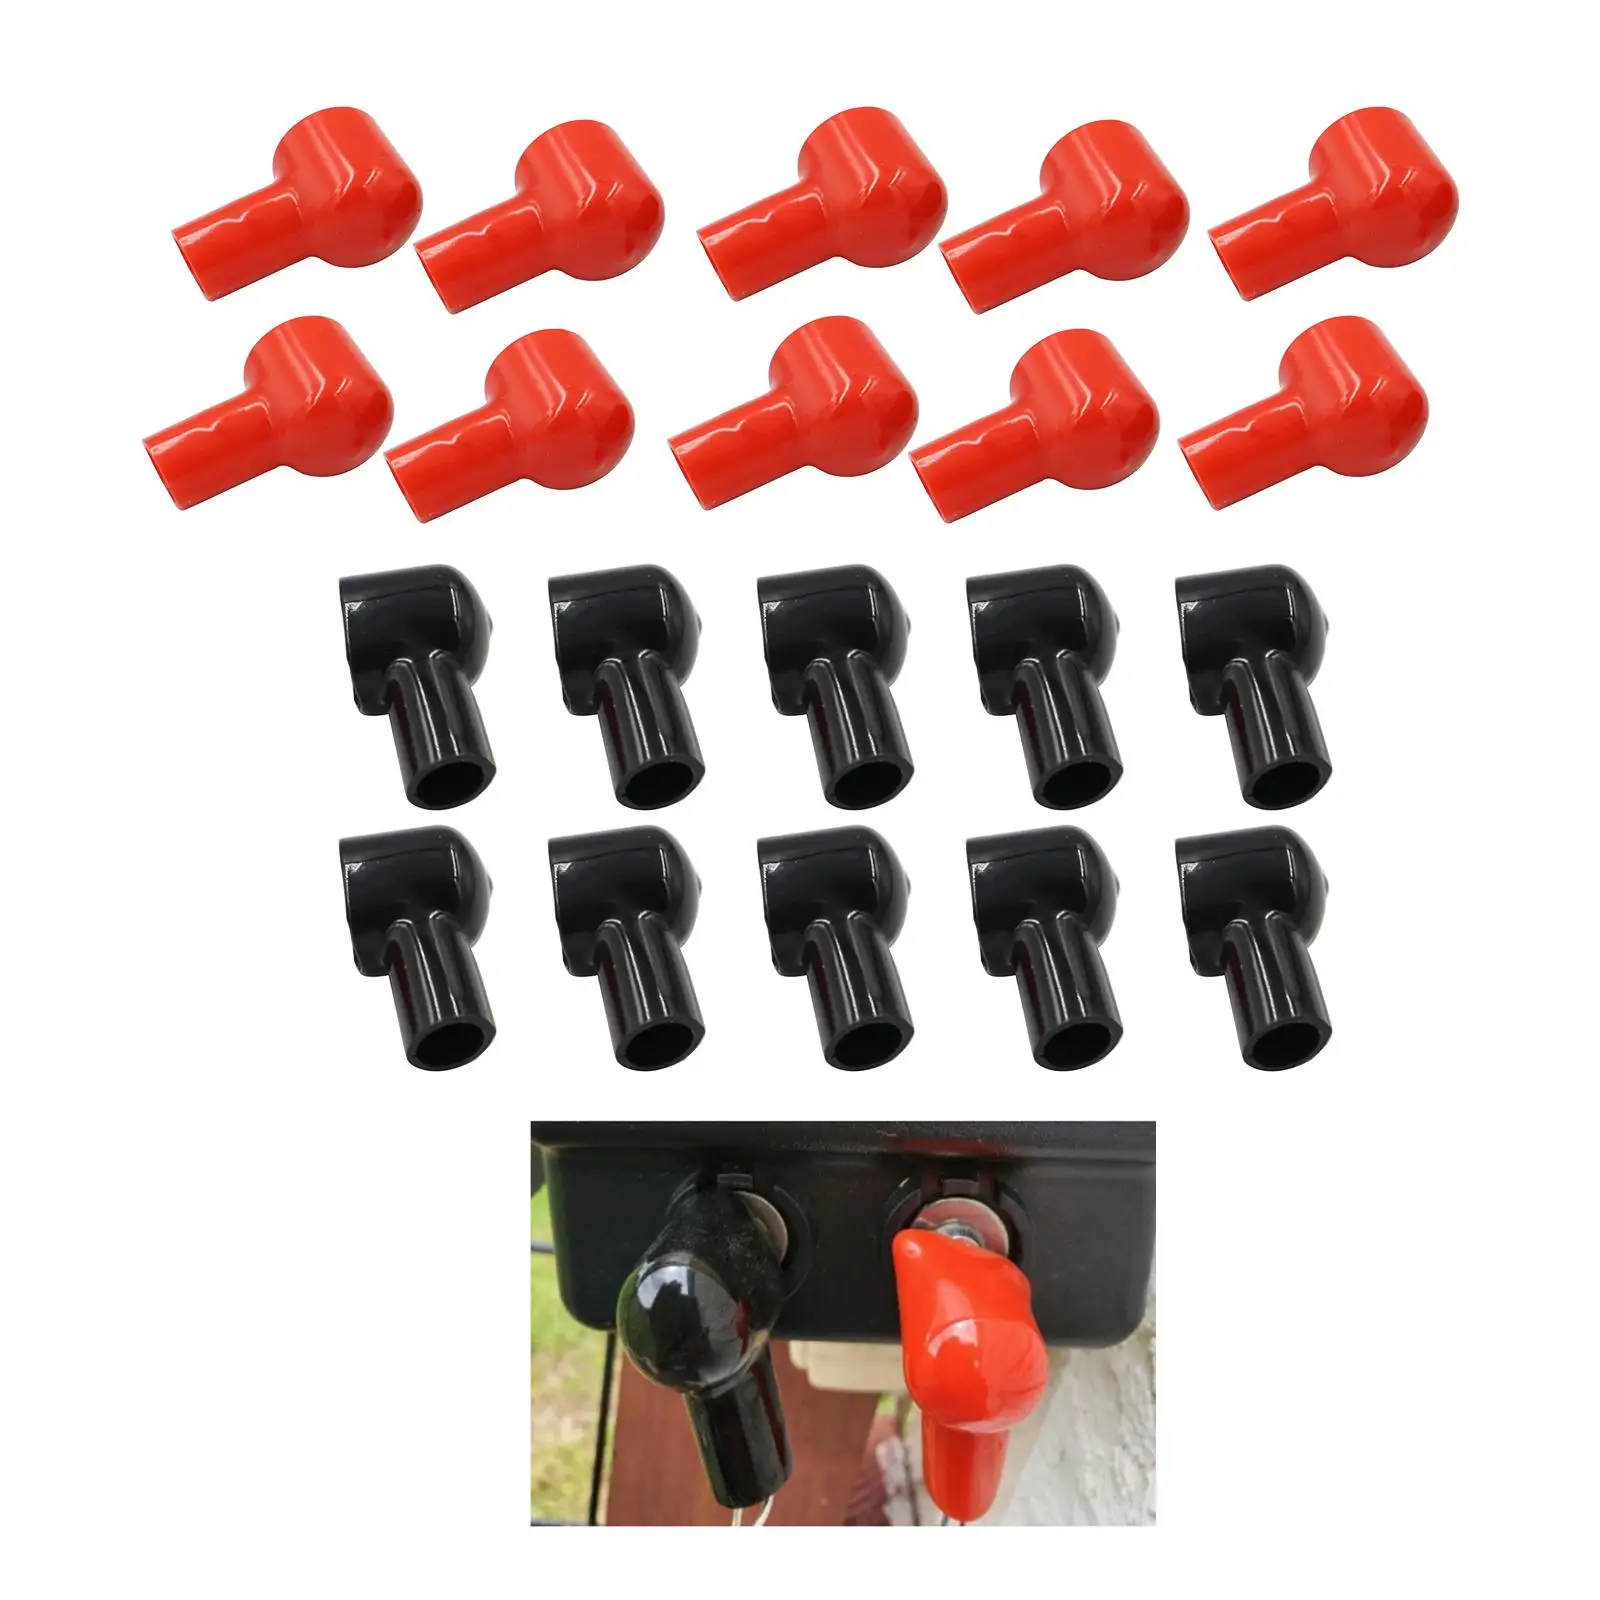 20 Pieces Red and Black Battery Terminal Cover, Flexible  Insulating Cover for Boat Automotive Vehicle Commercial Accessories